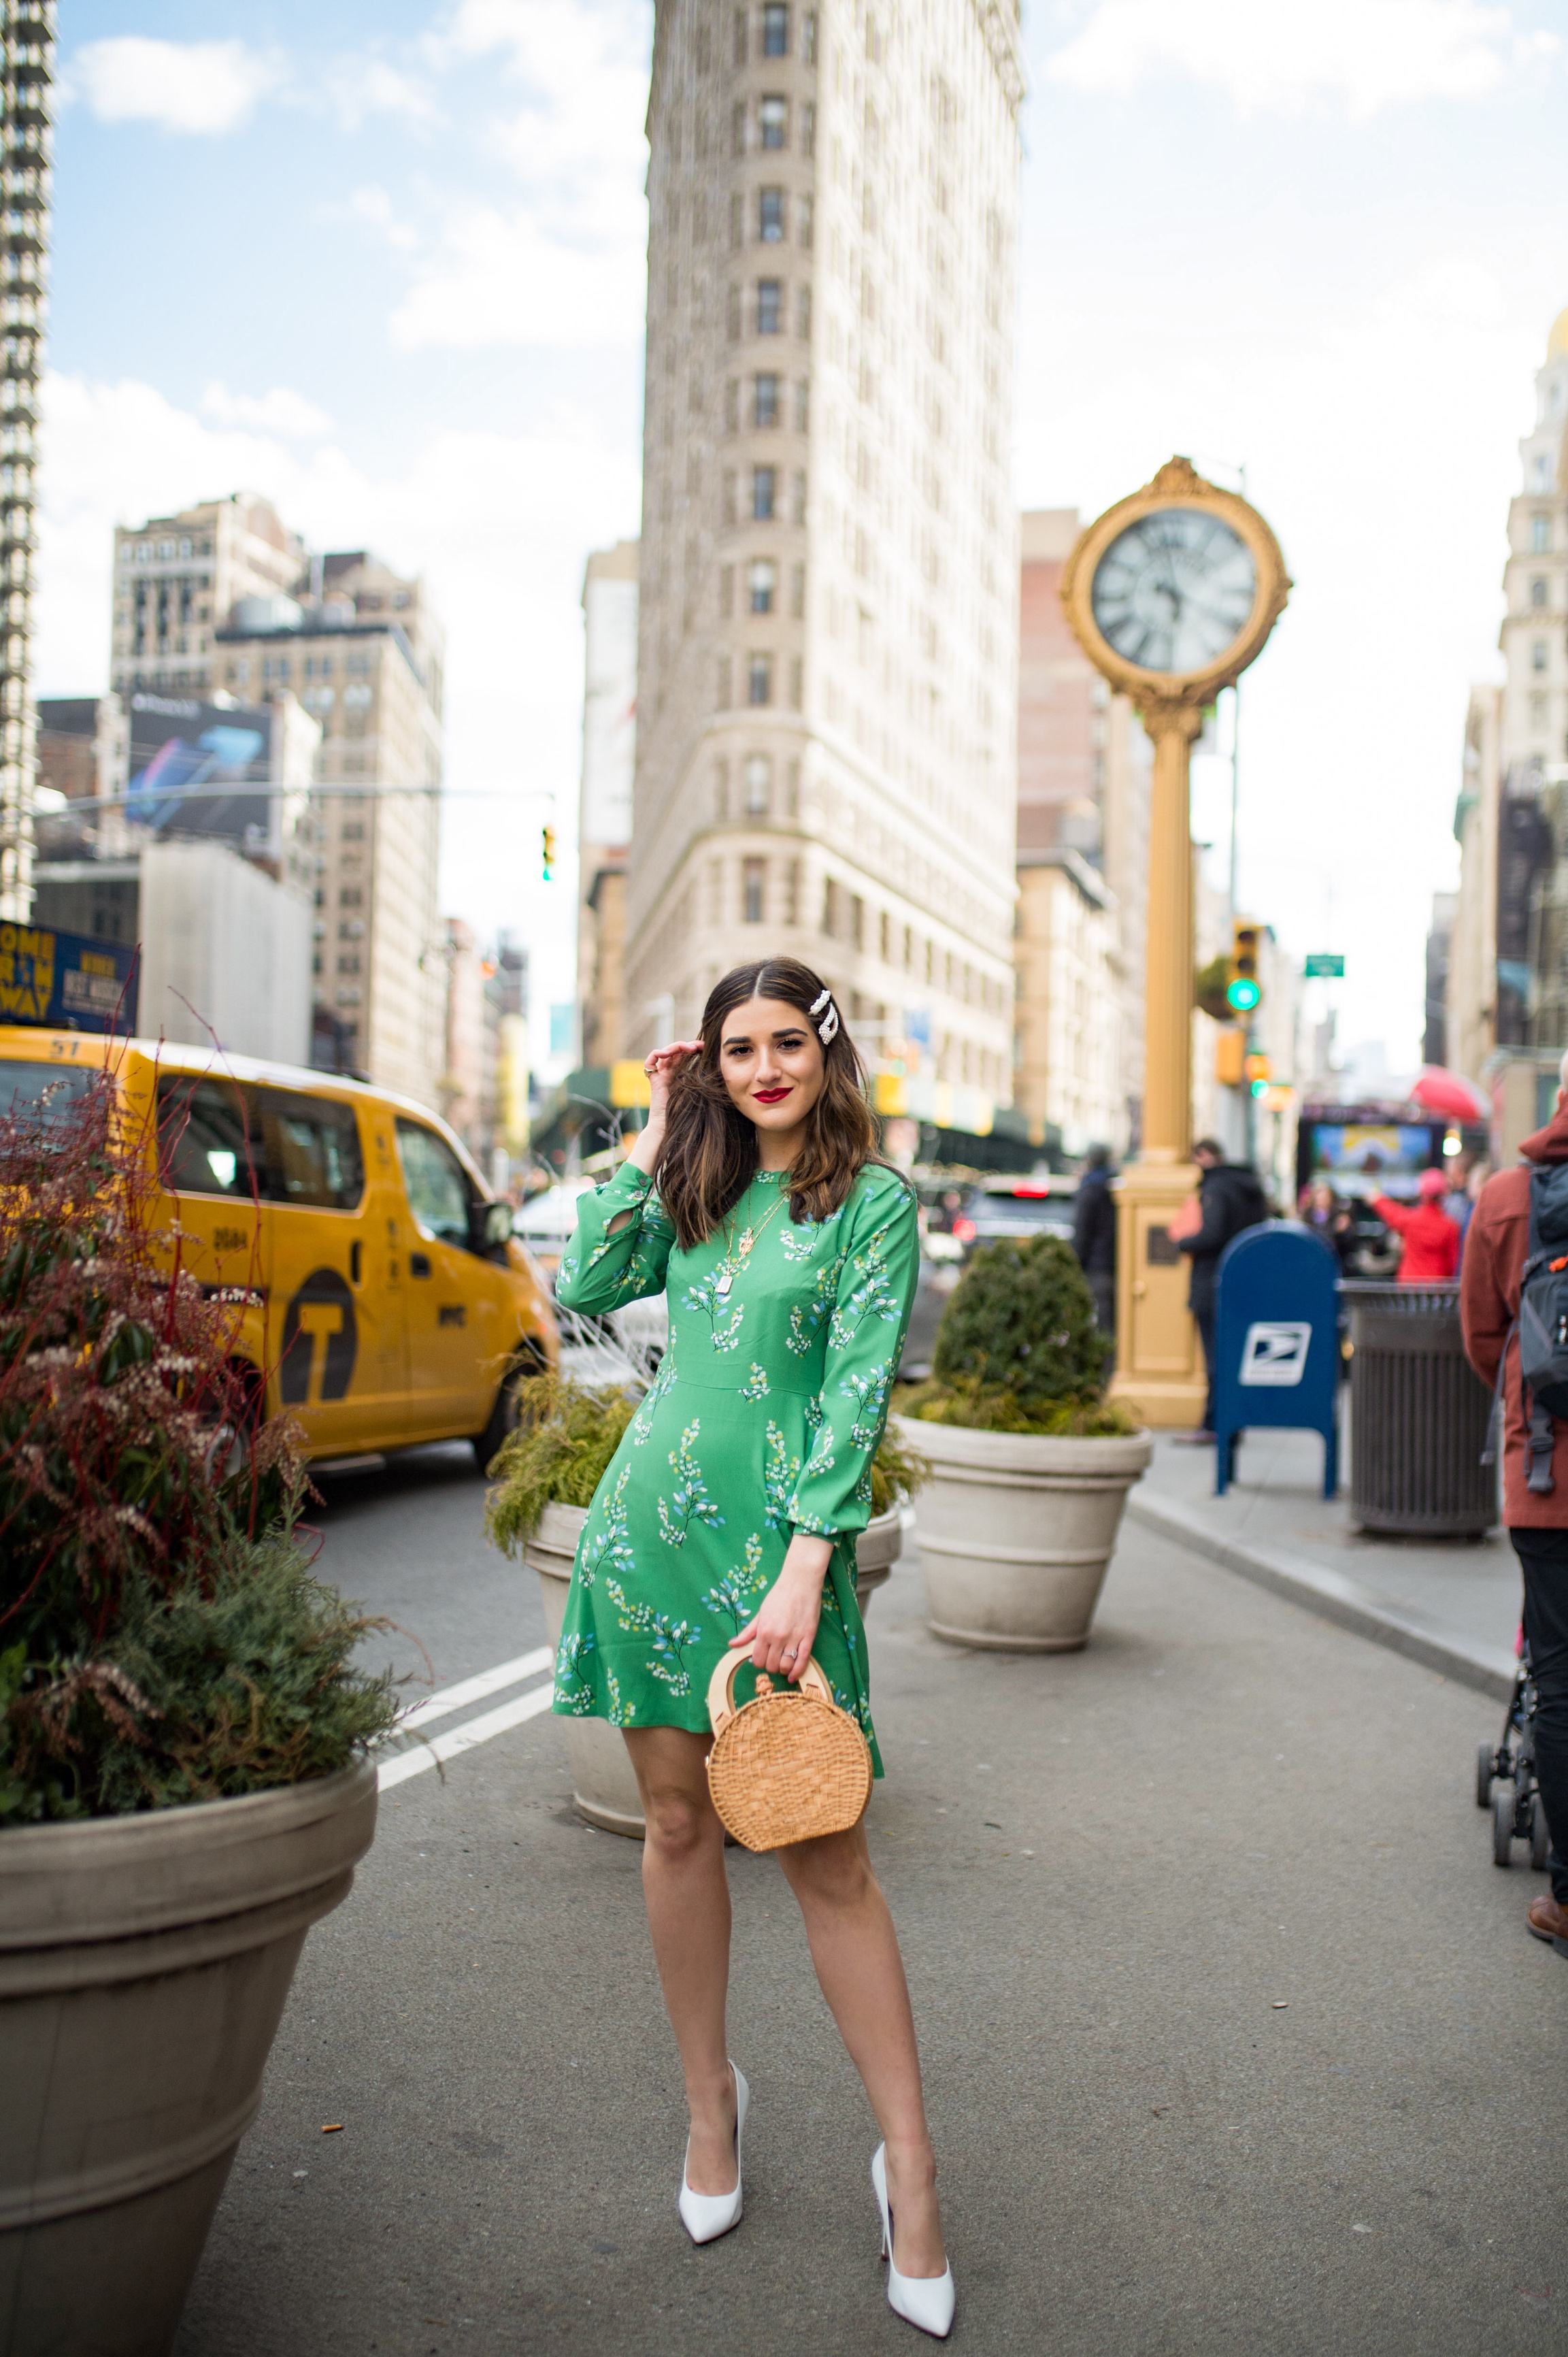 Styling Green For Spring LOFT Esther Santer Fashion Blog NYC Street Style Blogger Outfit OOTD Trendy Shopping White Heels Basket Circle Bag Florals Hair Accessories Pearl Clips Flatiron Photoshoot Inspo Inspiration Petite Dress Inclusive Sizing  Bag.jpg